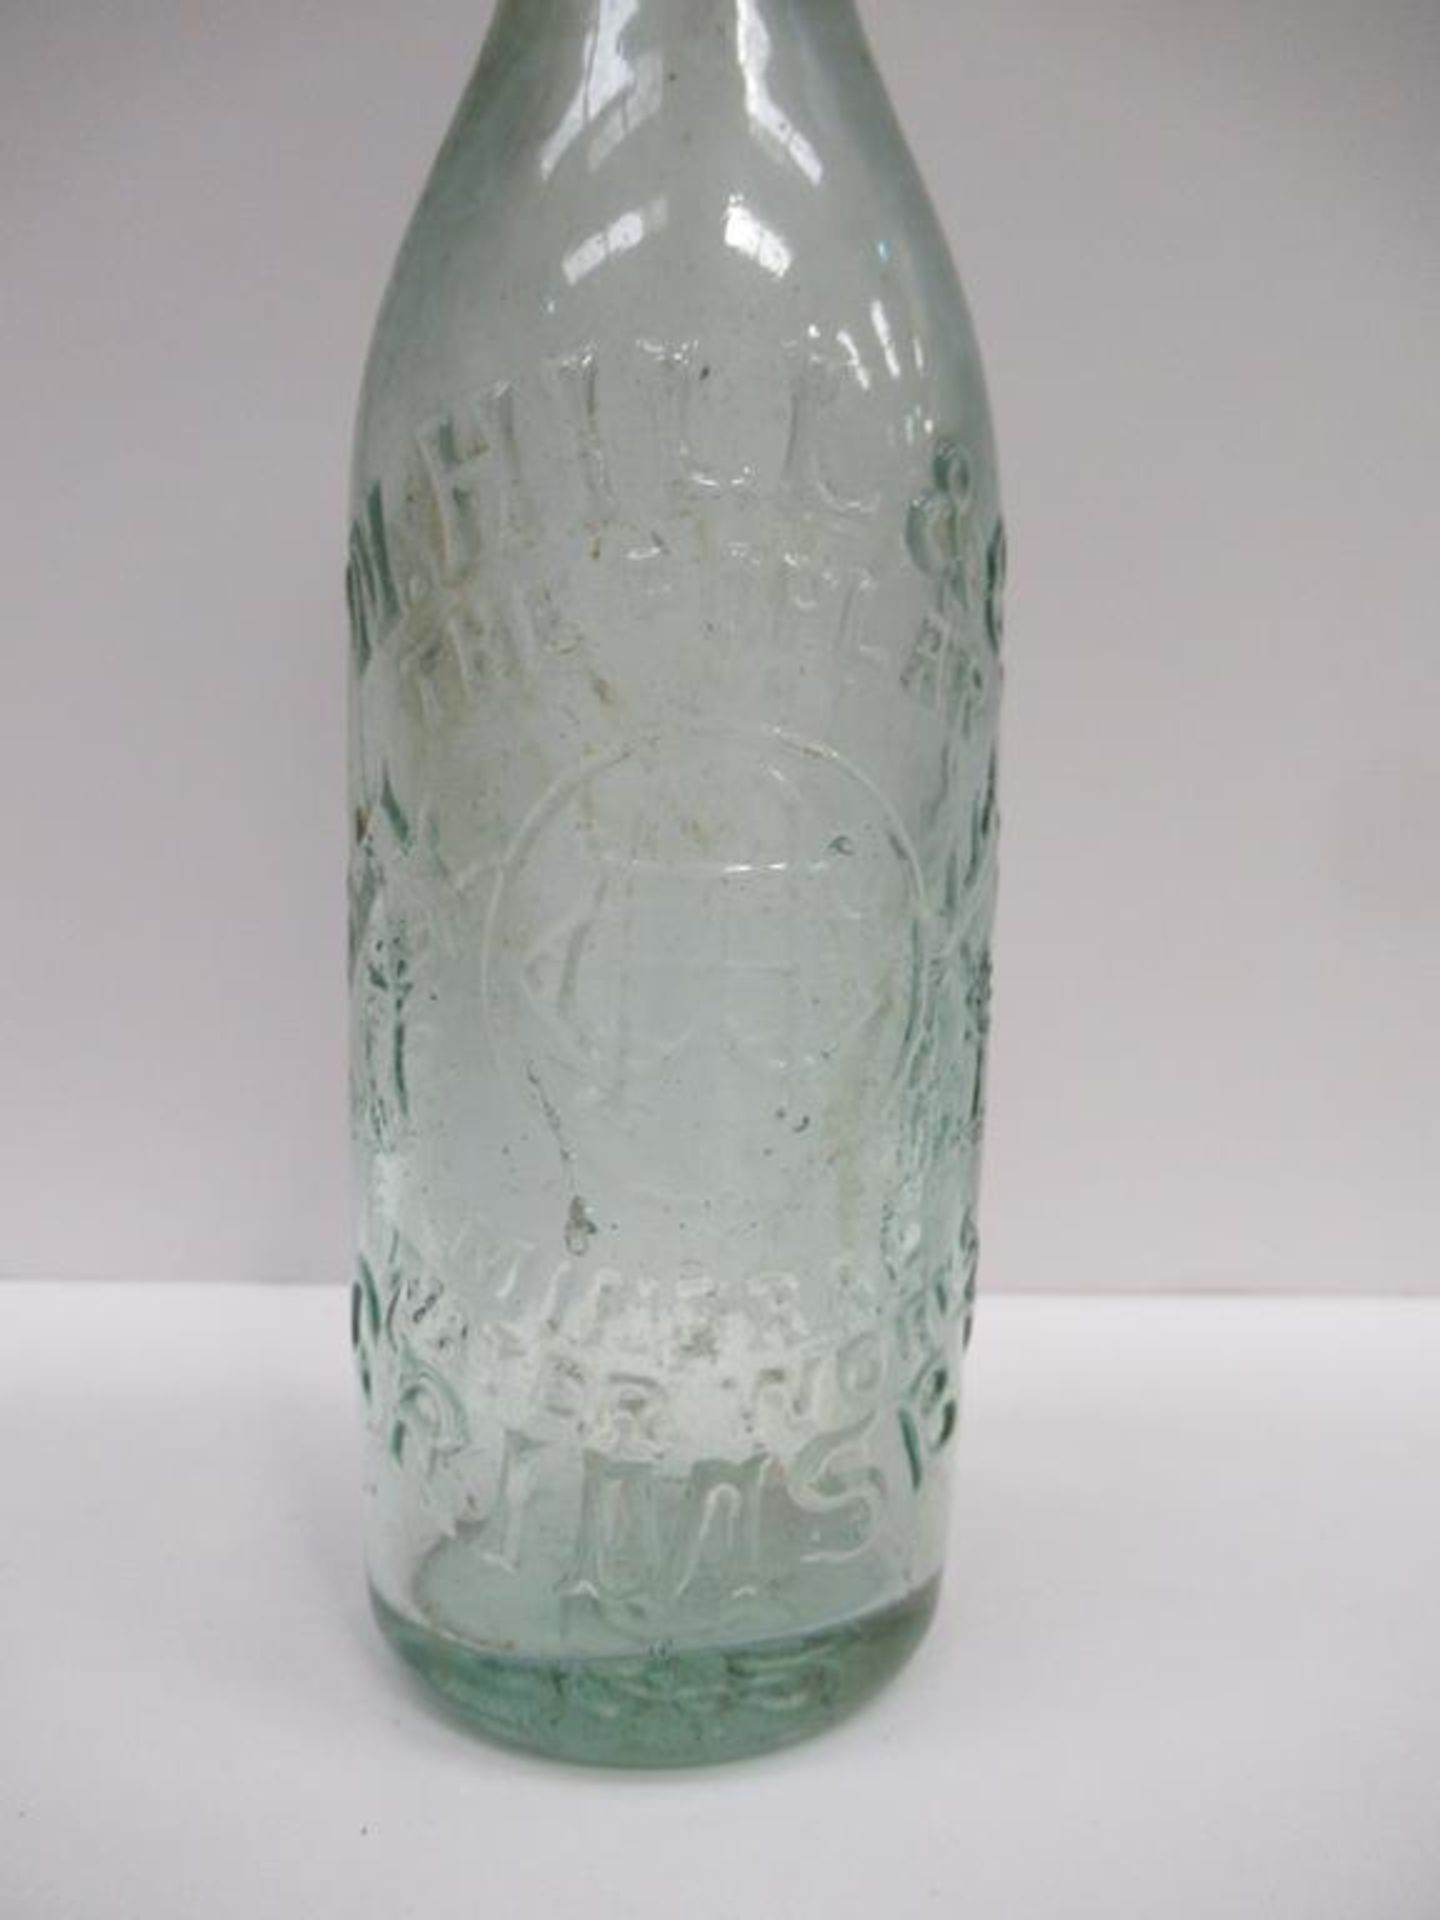 6x Grimsby (3x New Clee) W. Hill & Son (2) and W. Hill & Co (2) bottles - Image 23 of 25